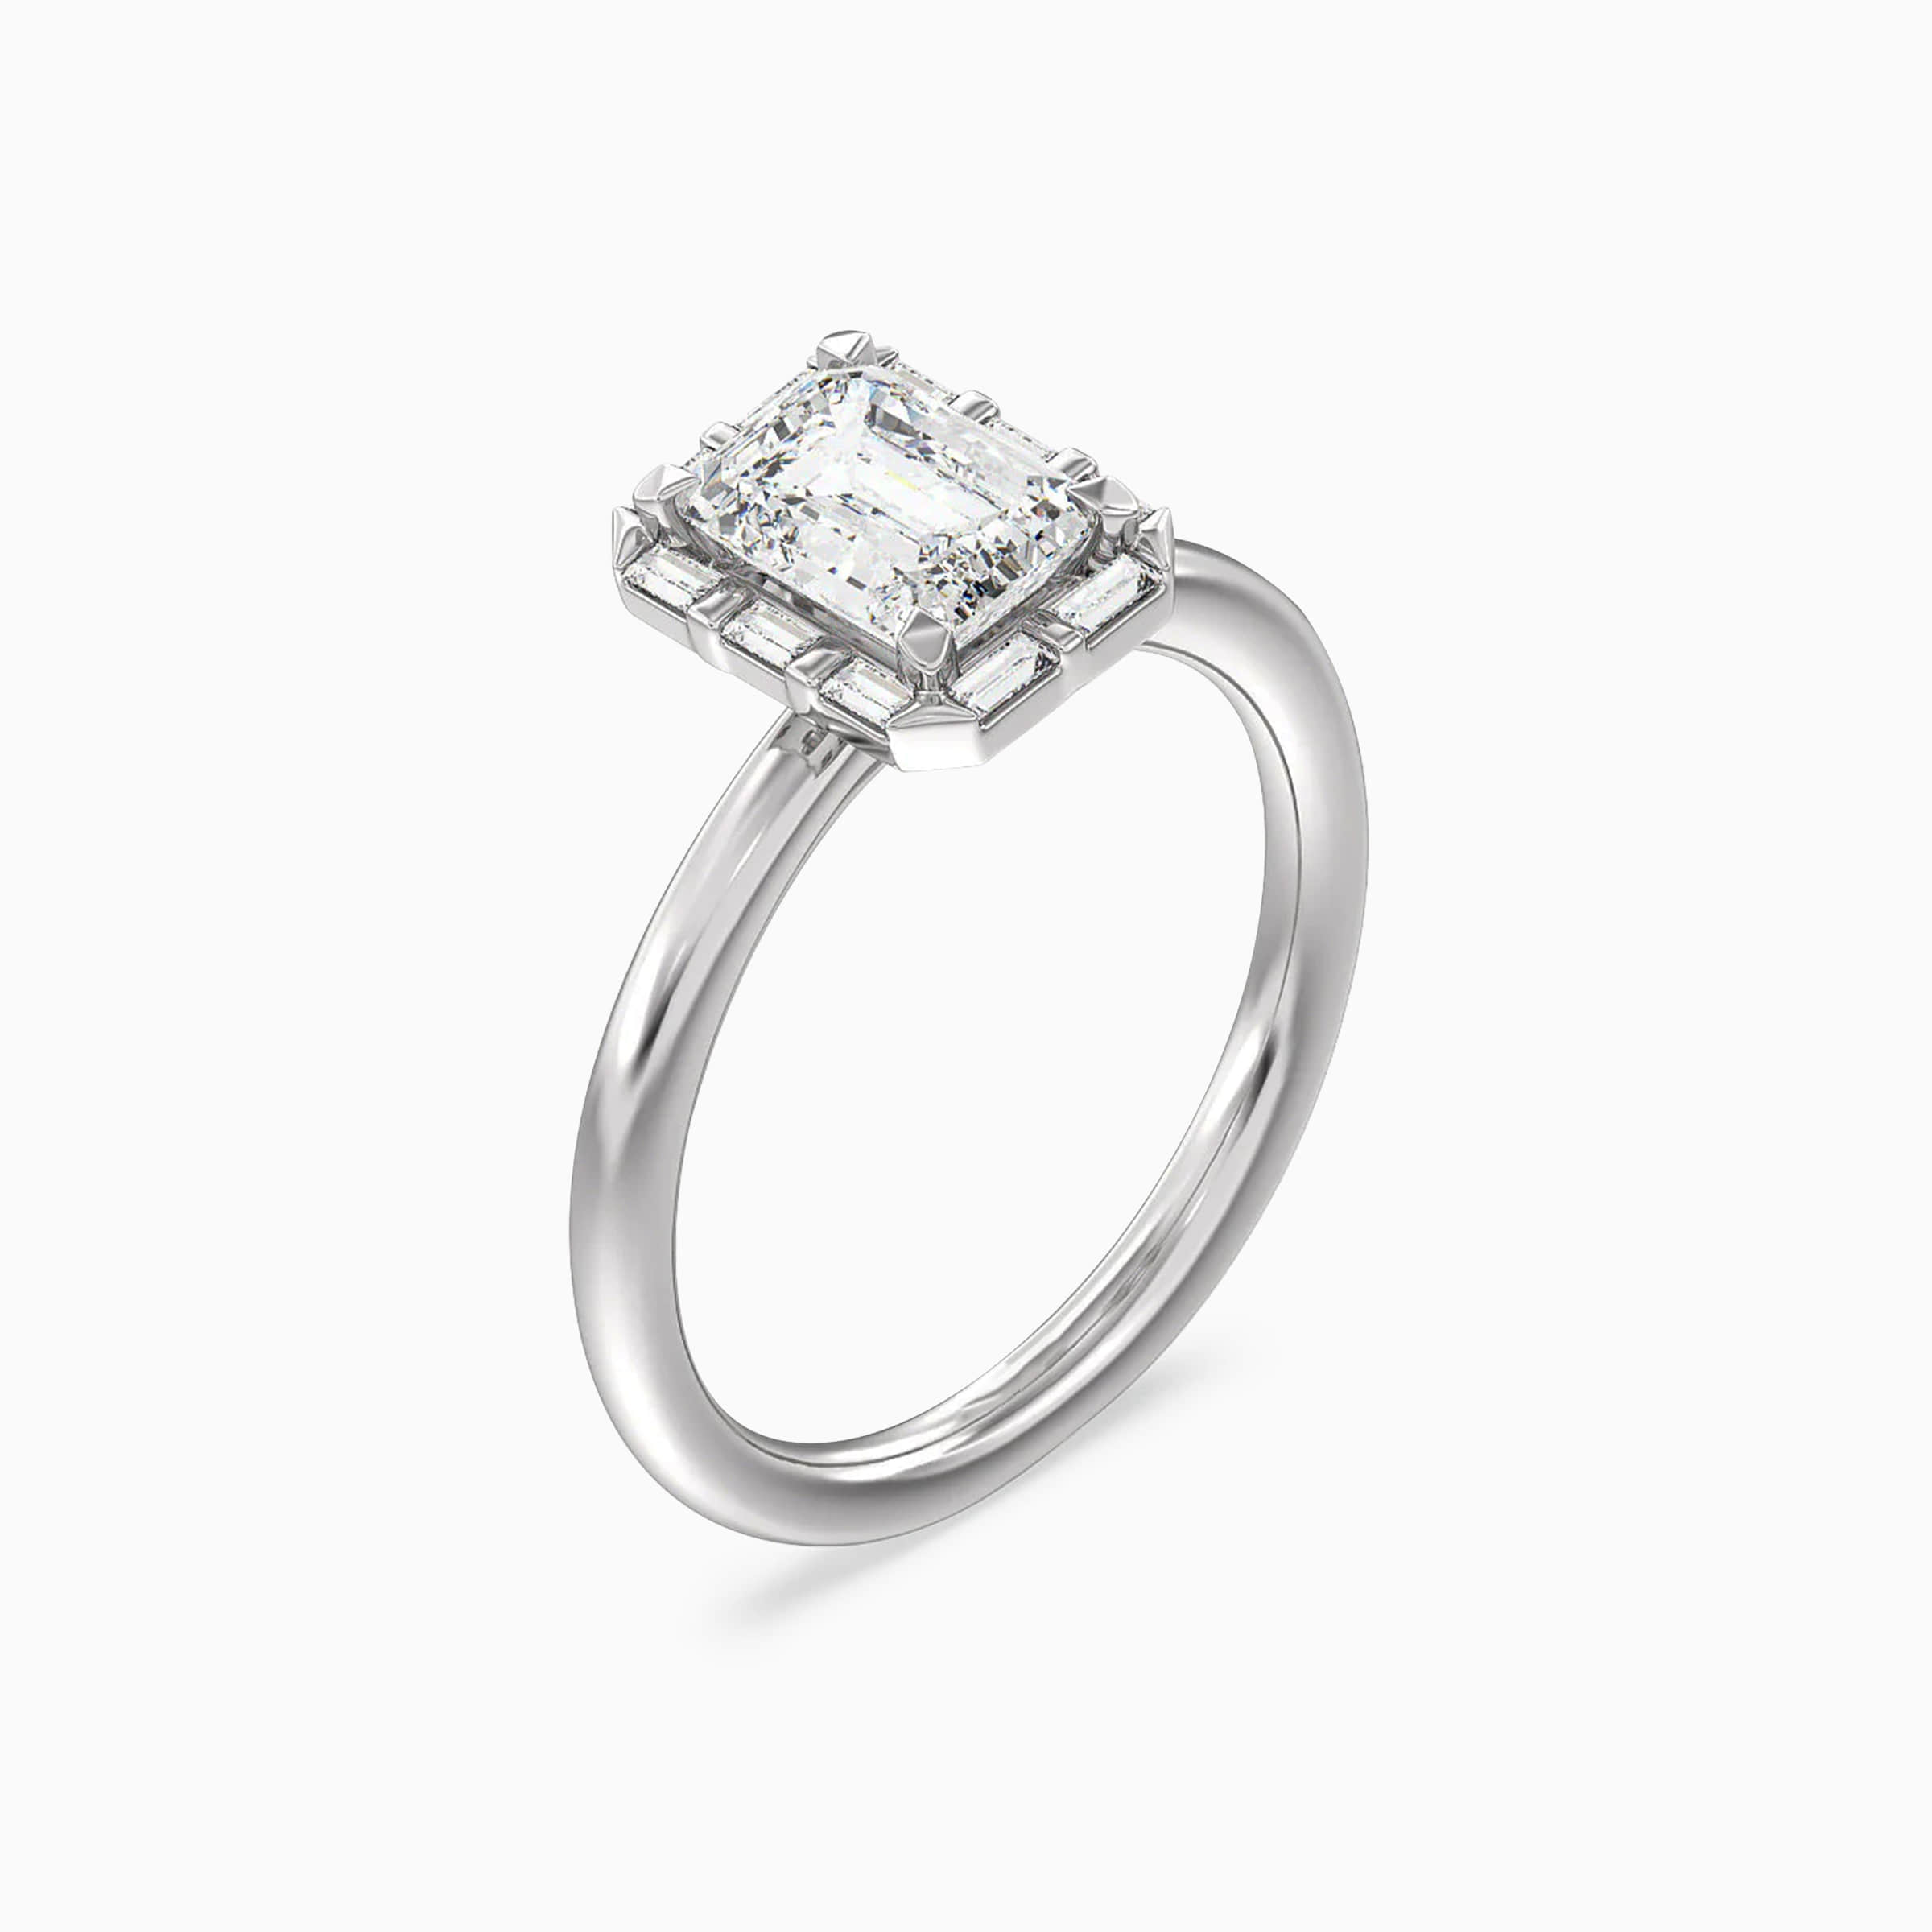 Darry Ring emerald cut halo engagement ring in platinum